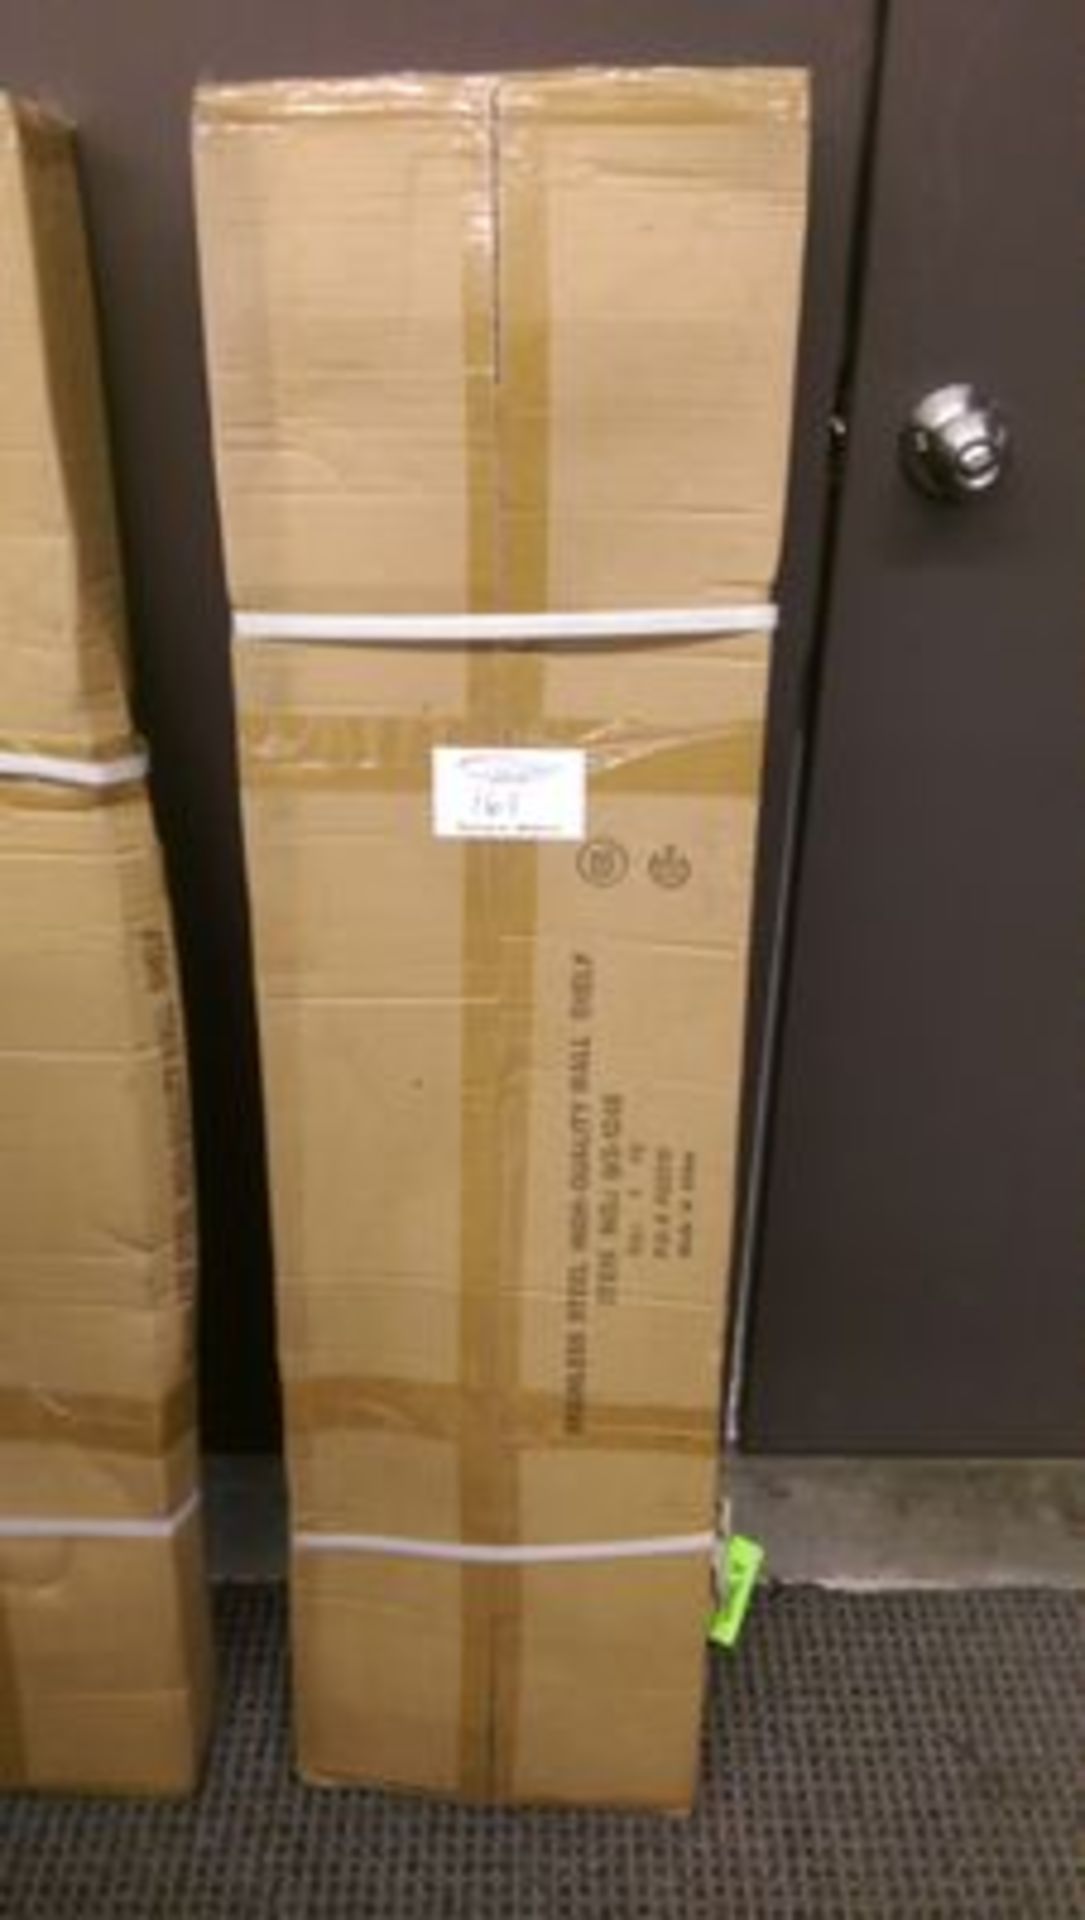 4 ft Stainless Steel Wall Shelf in Box